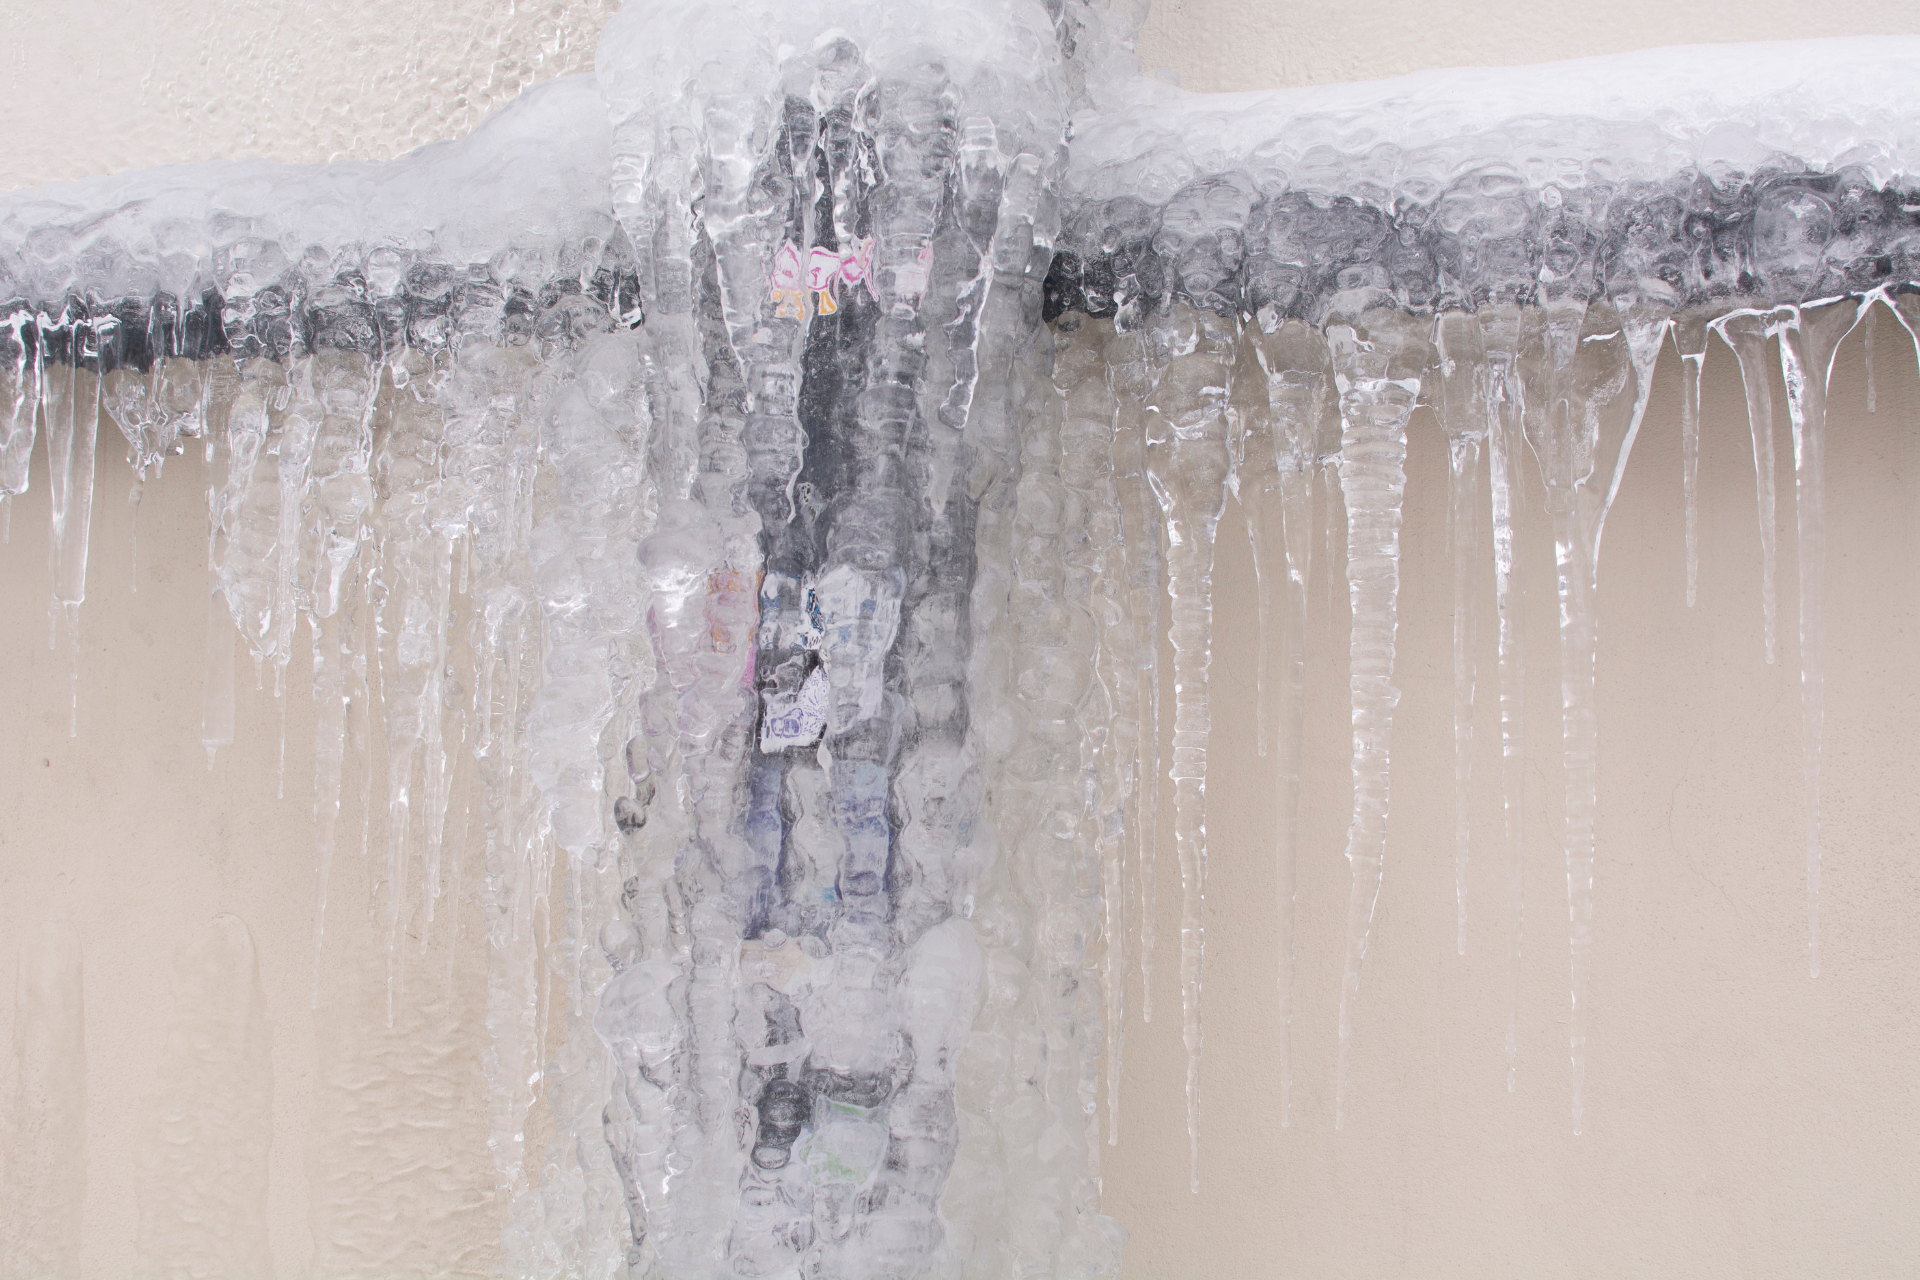 A frozen water pipe covered in icicles